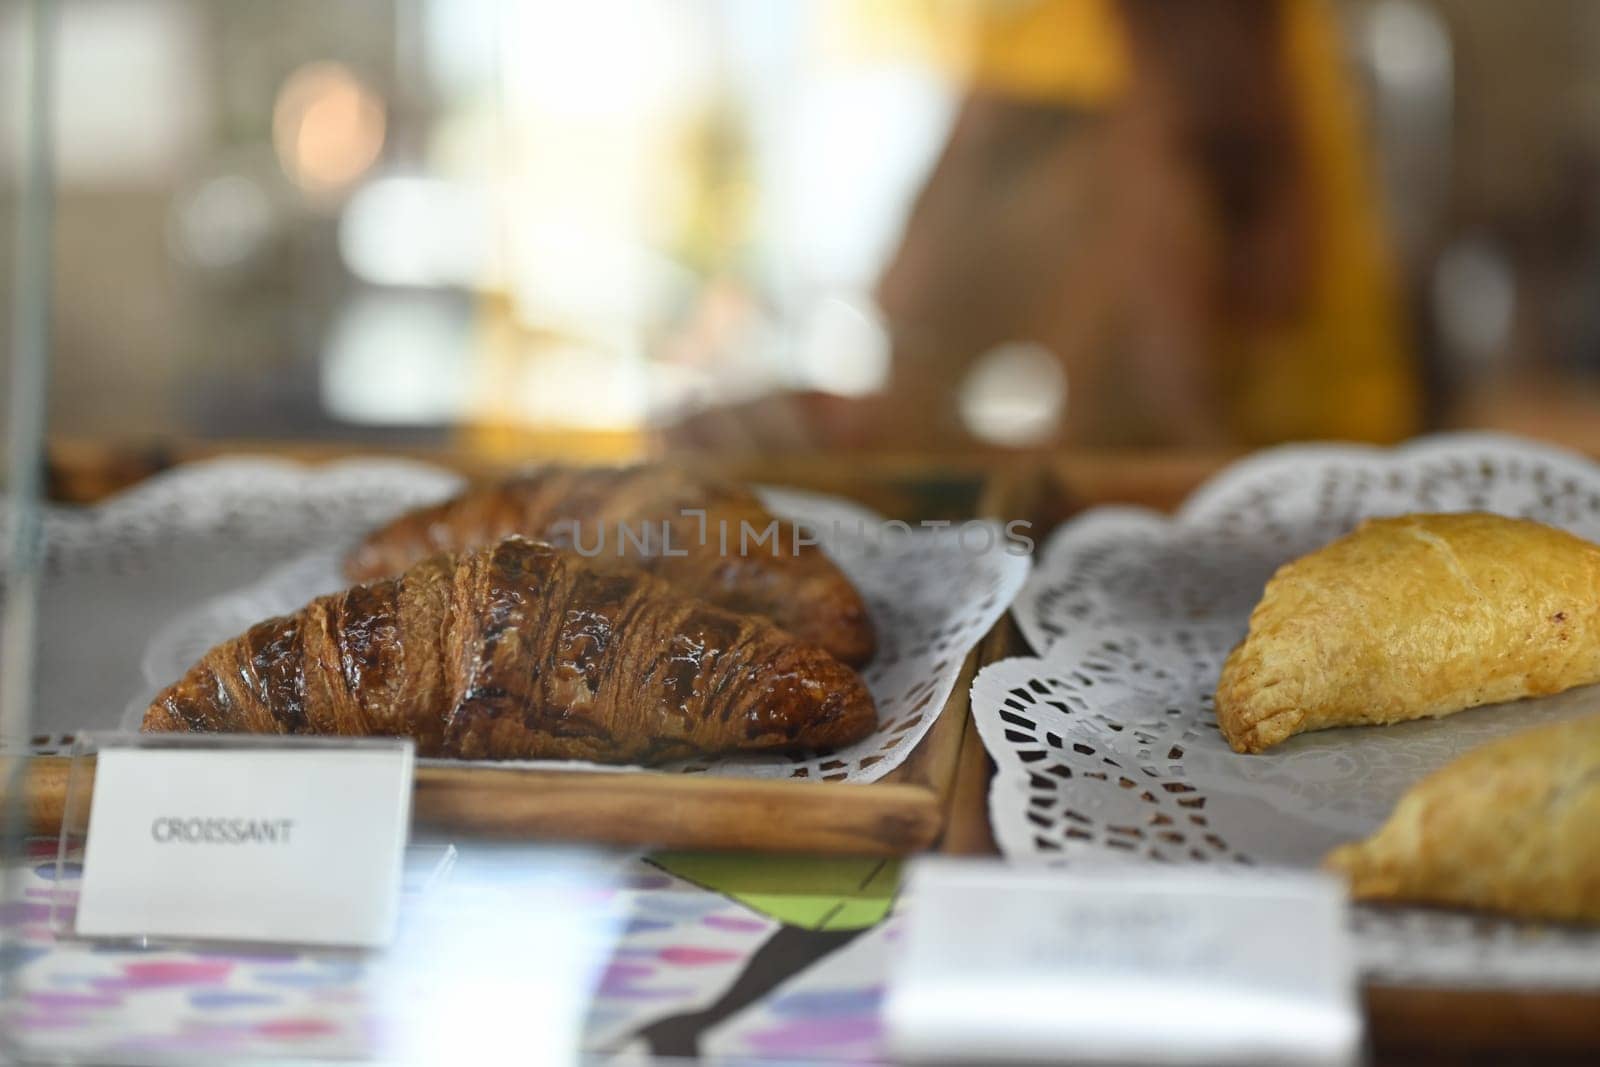 Freshly baked chocolate croissants and pies in glass showcase at bakery.